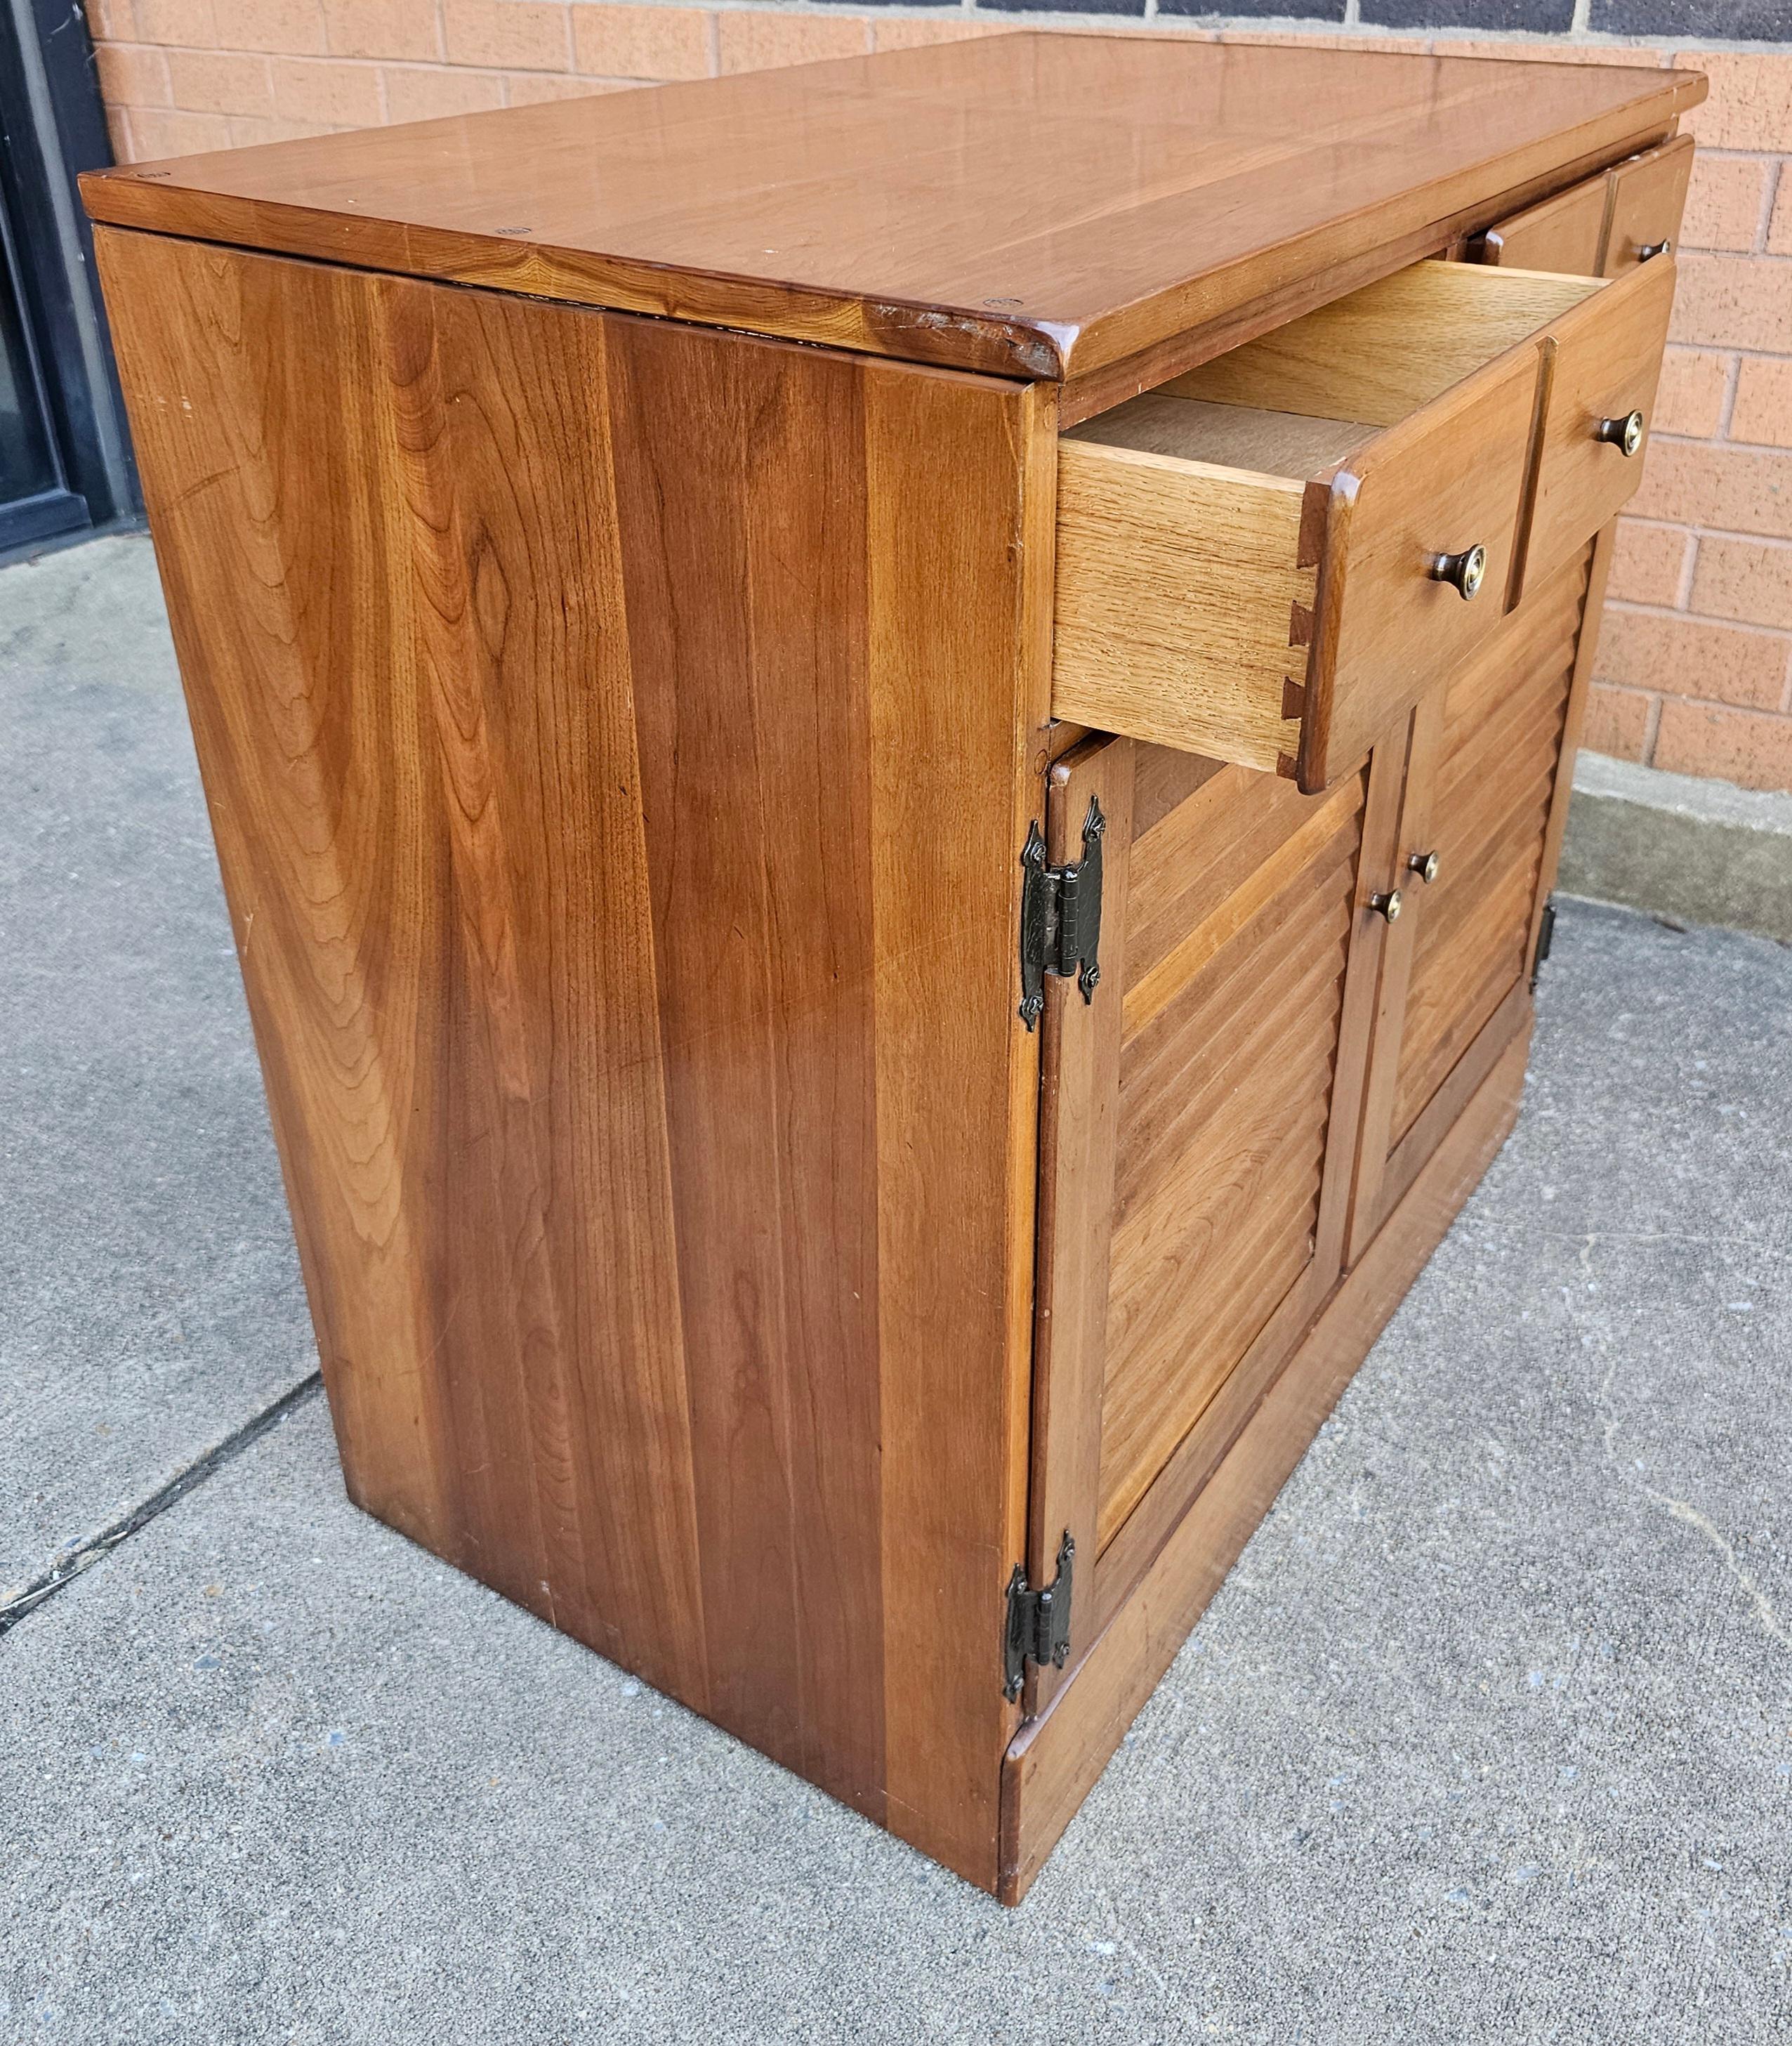 A Mid 20th Century Solid Cherry Side Cabinet, Circa 1970s. Features two top drawers and large double door storage cabinet with and an adjustable height shelf. Wood backing. Measures 30